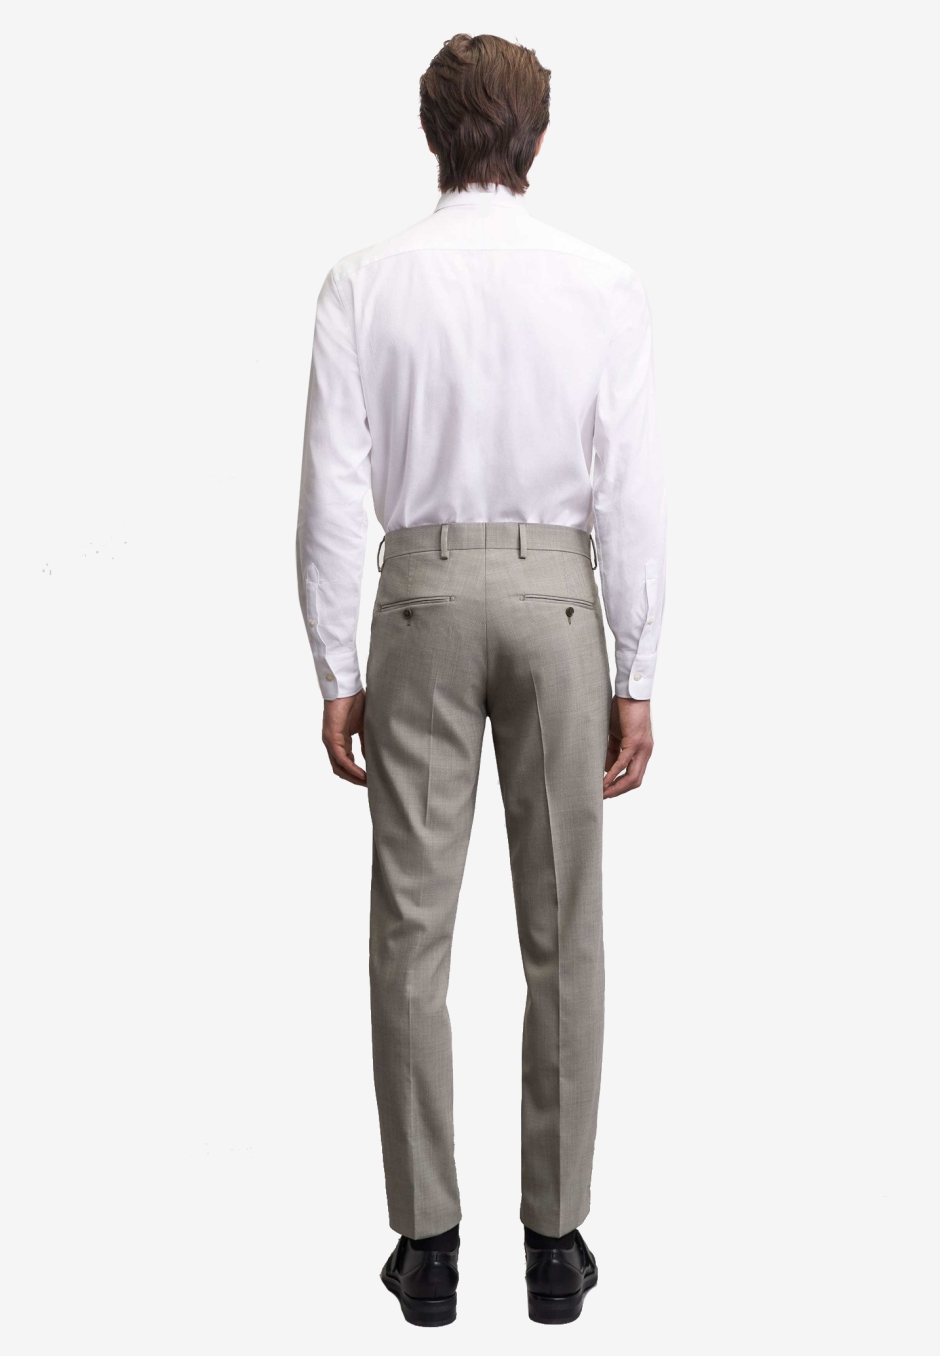 Tiger of Sweden Tordon Trousers